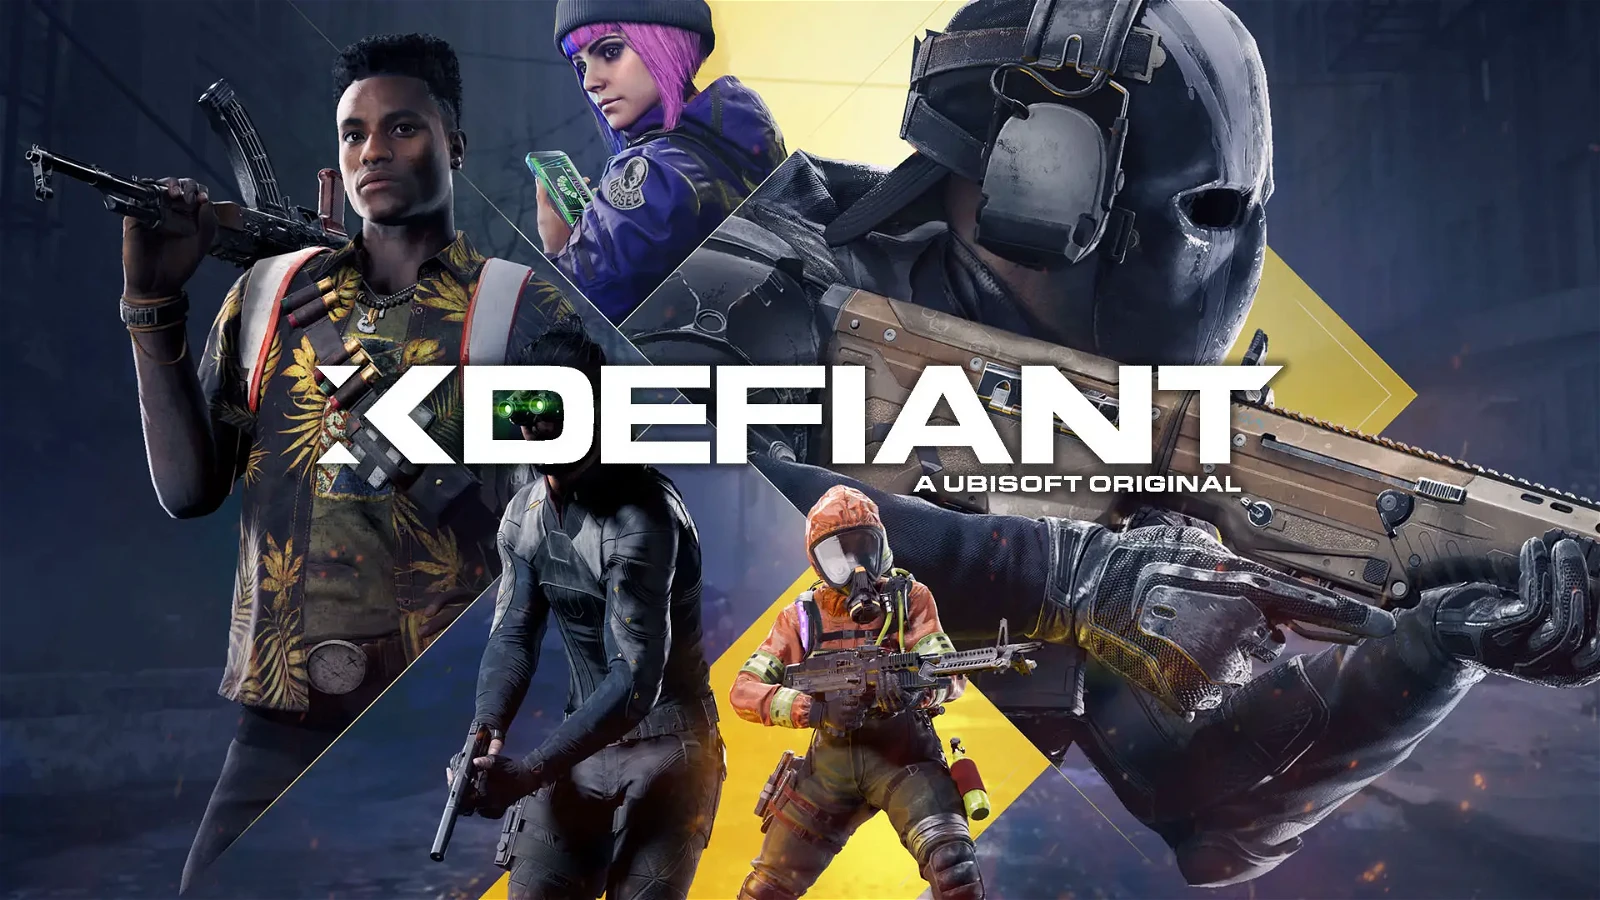 XDefiant is the game players hope brings more competition to the Call of Duty series. 